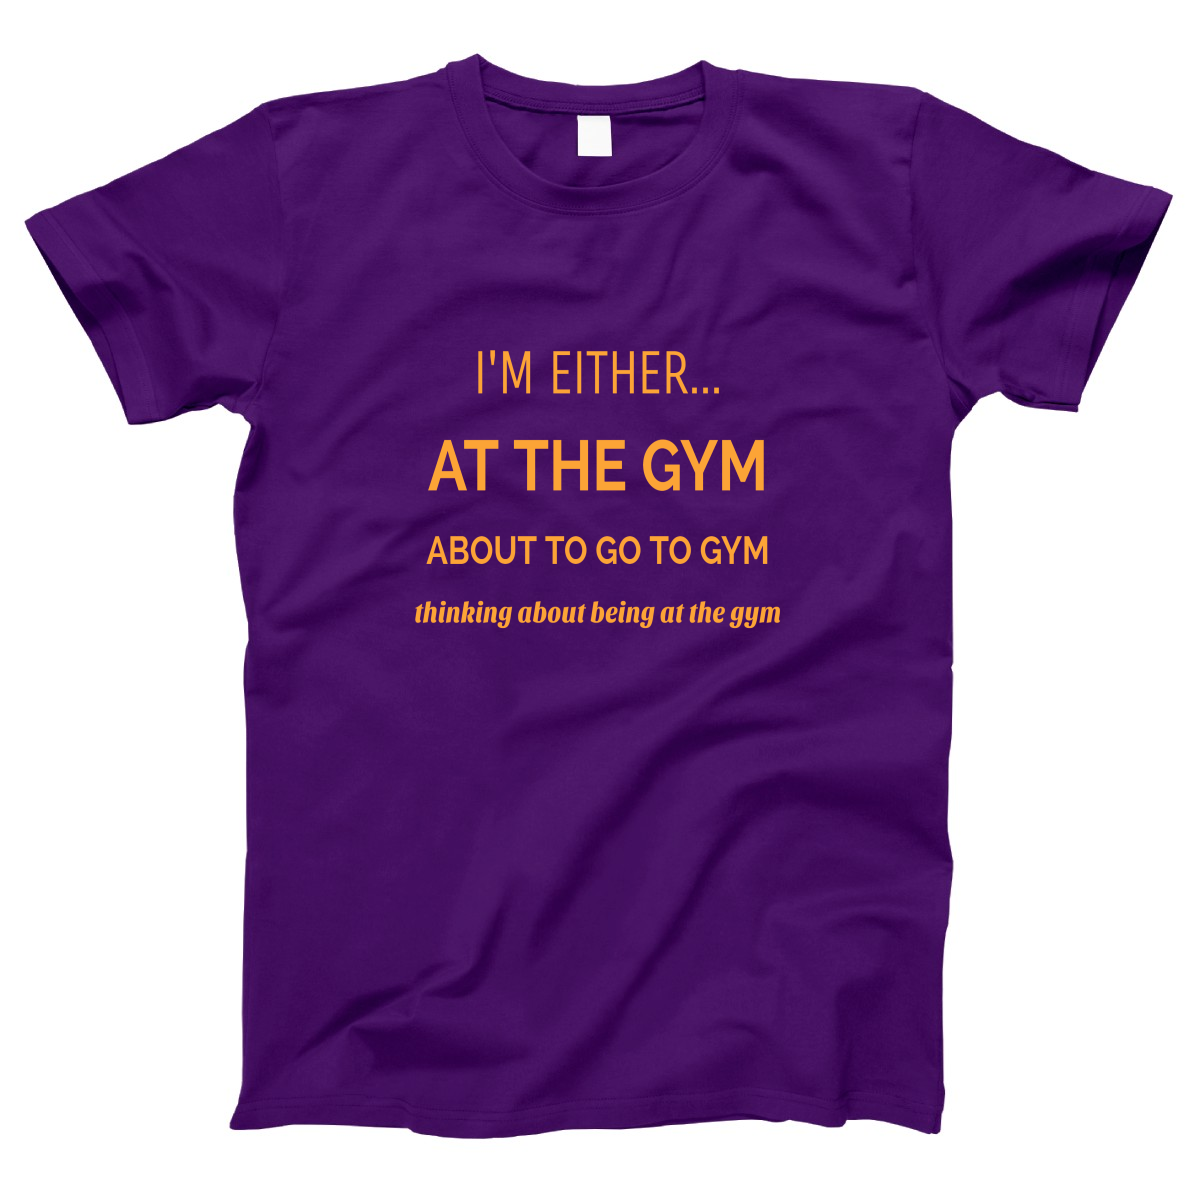 I’m either at the gym Women's T-shirt | Purple